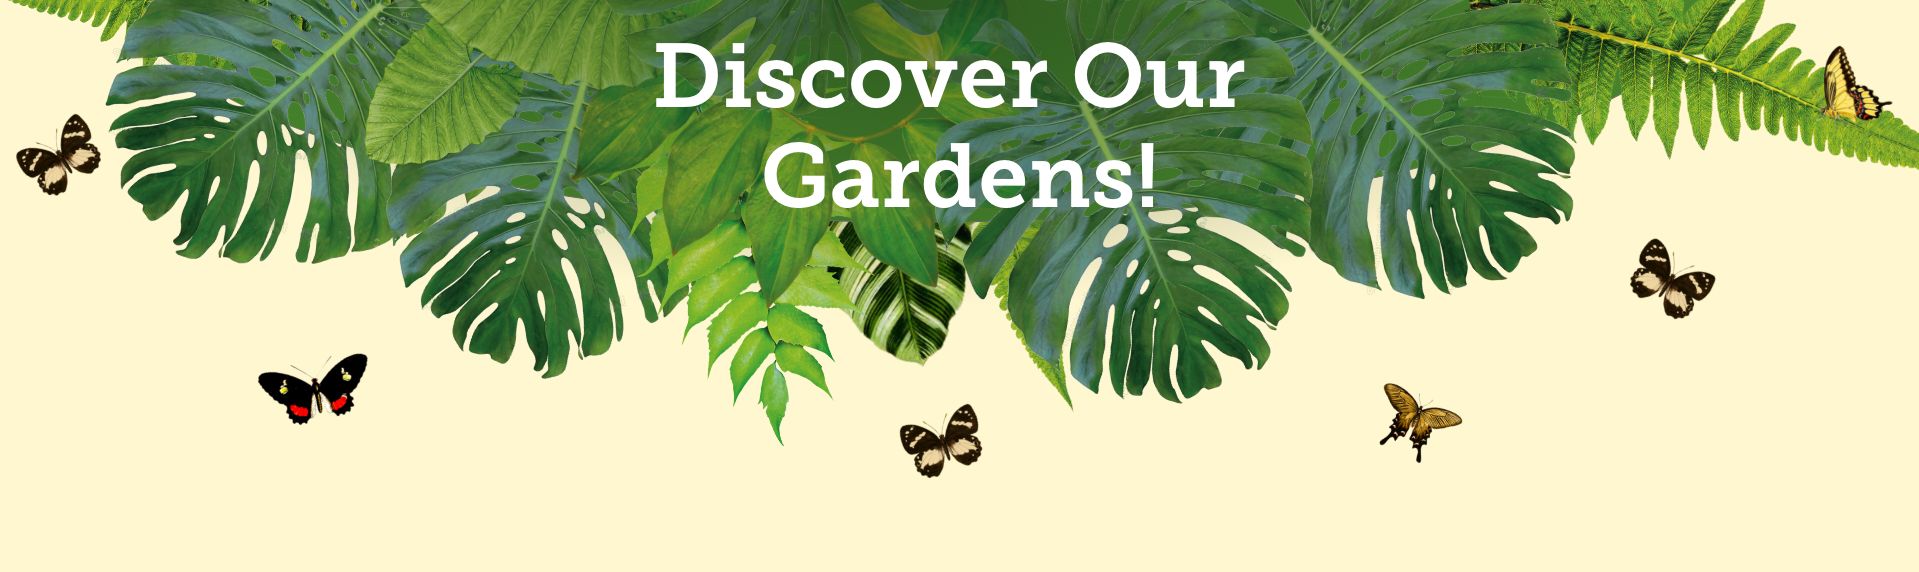 Illustrated foliage with butterflies flying around and the text, "Discover Our Gardens!"